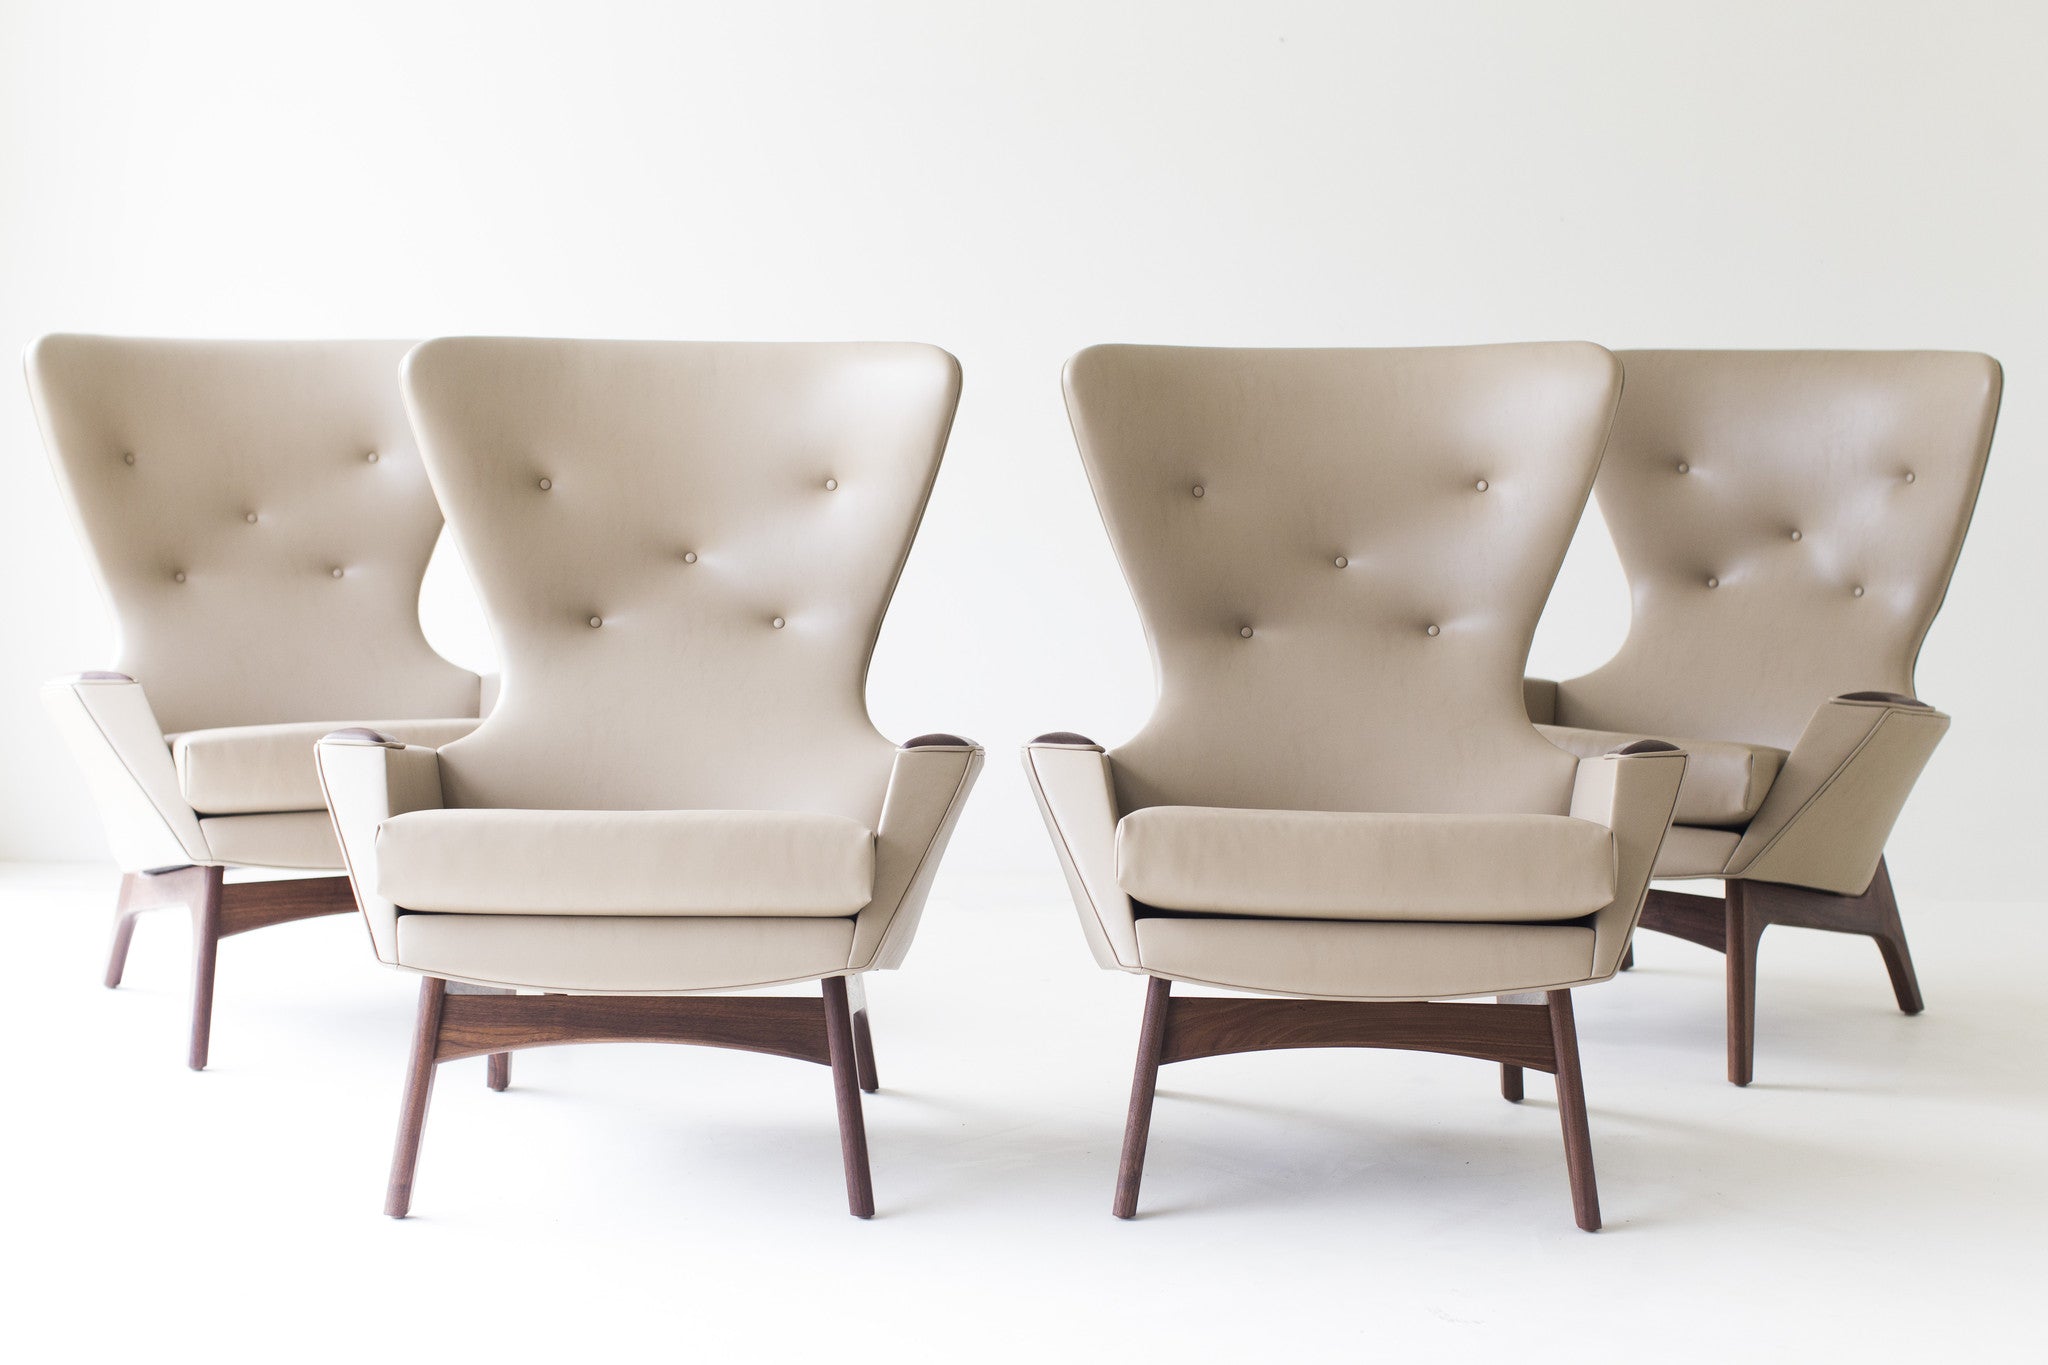 oil-leather-wing-chairs-1410-07